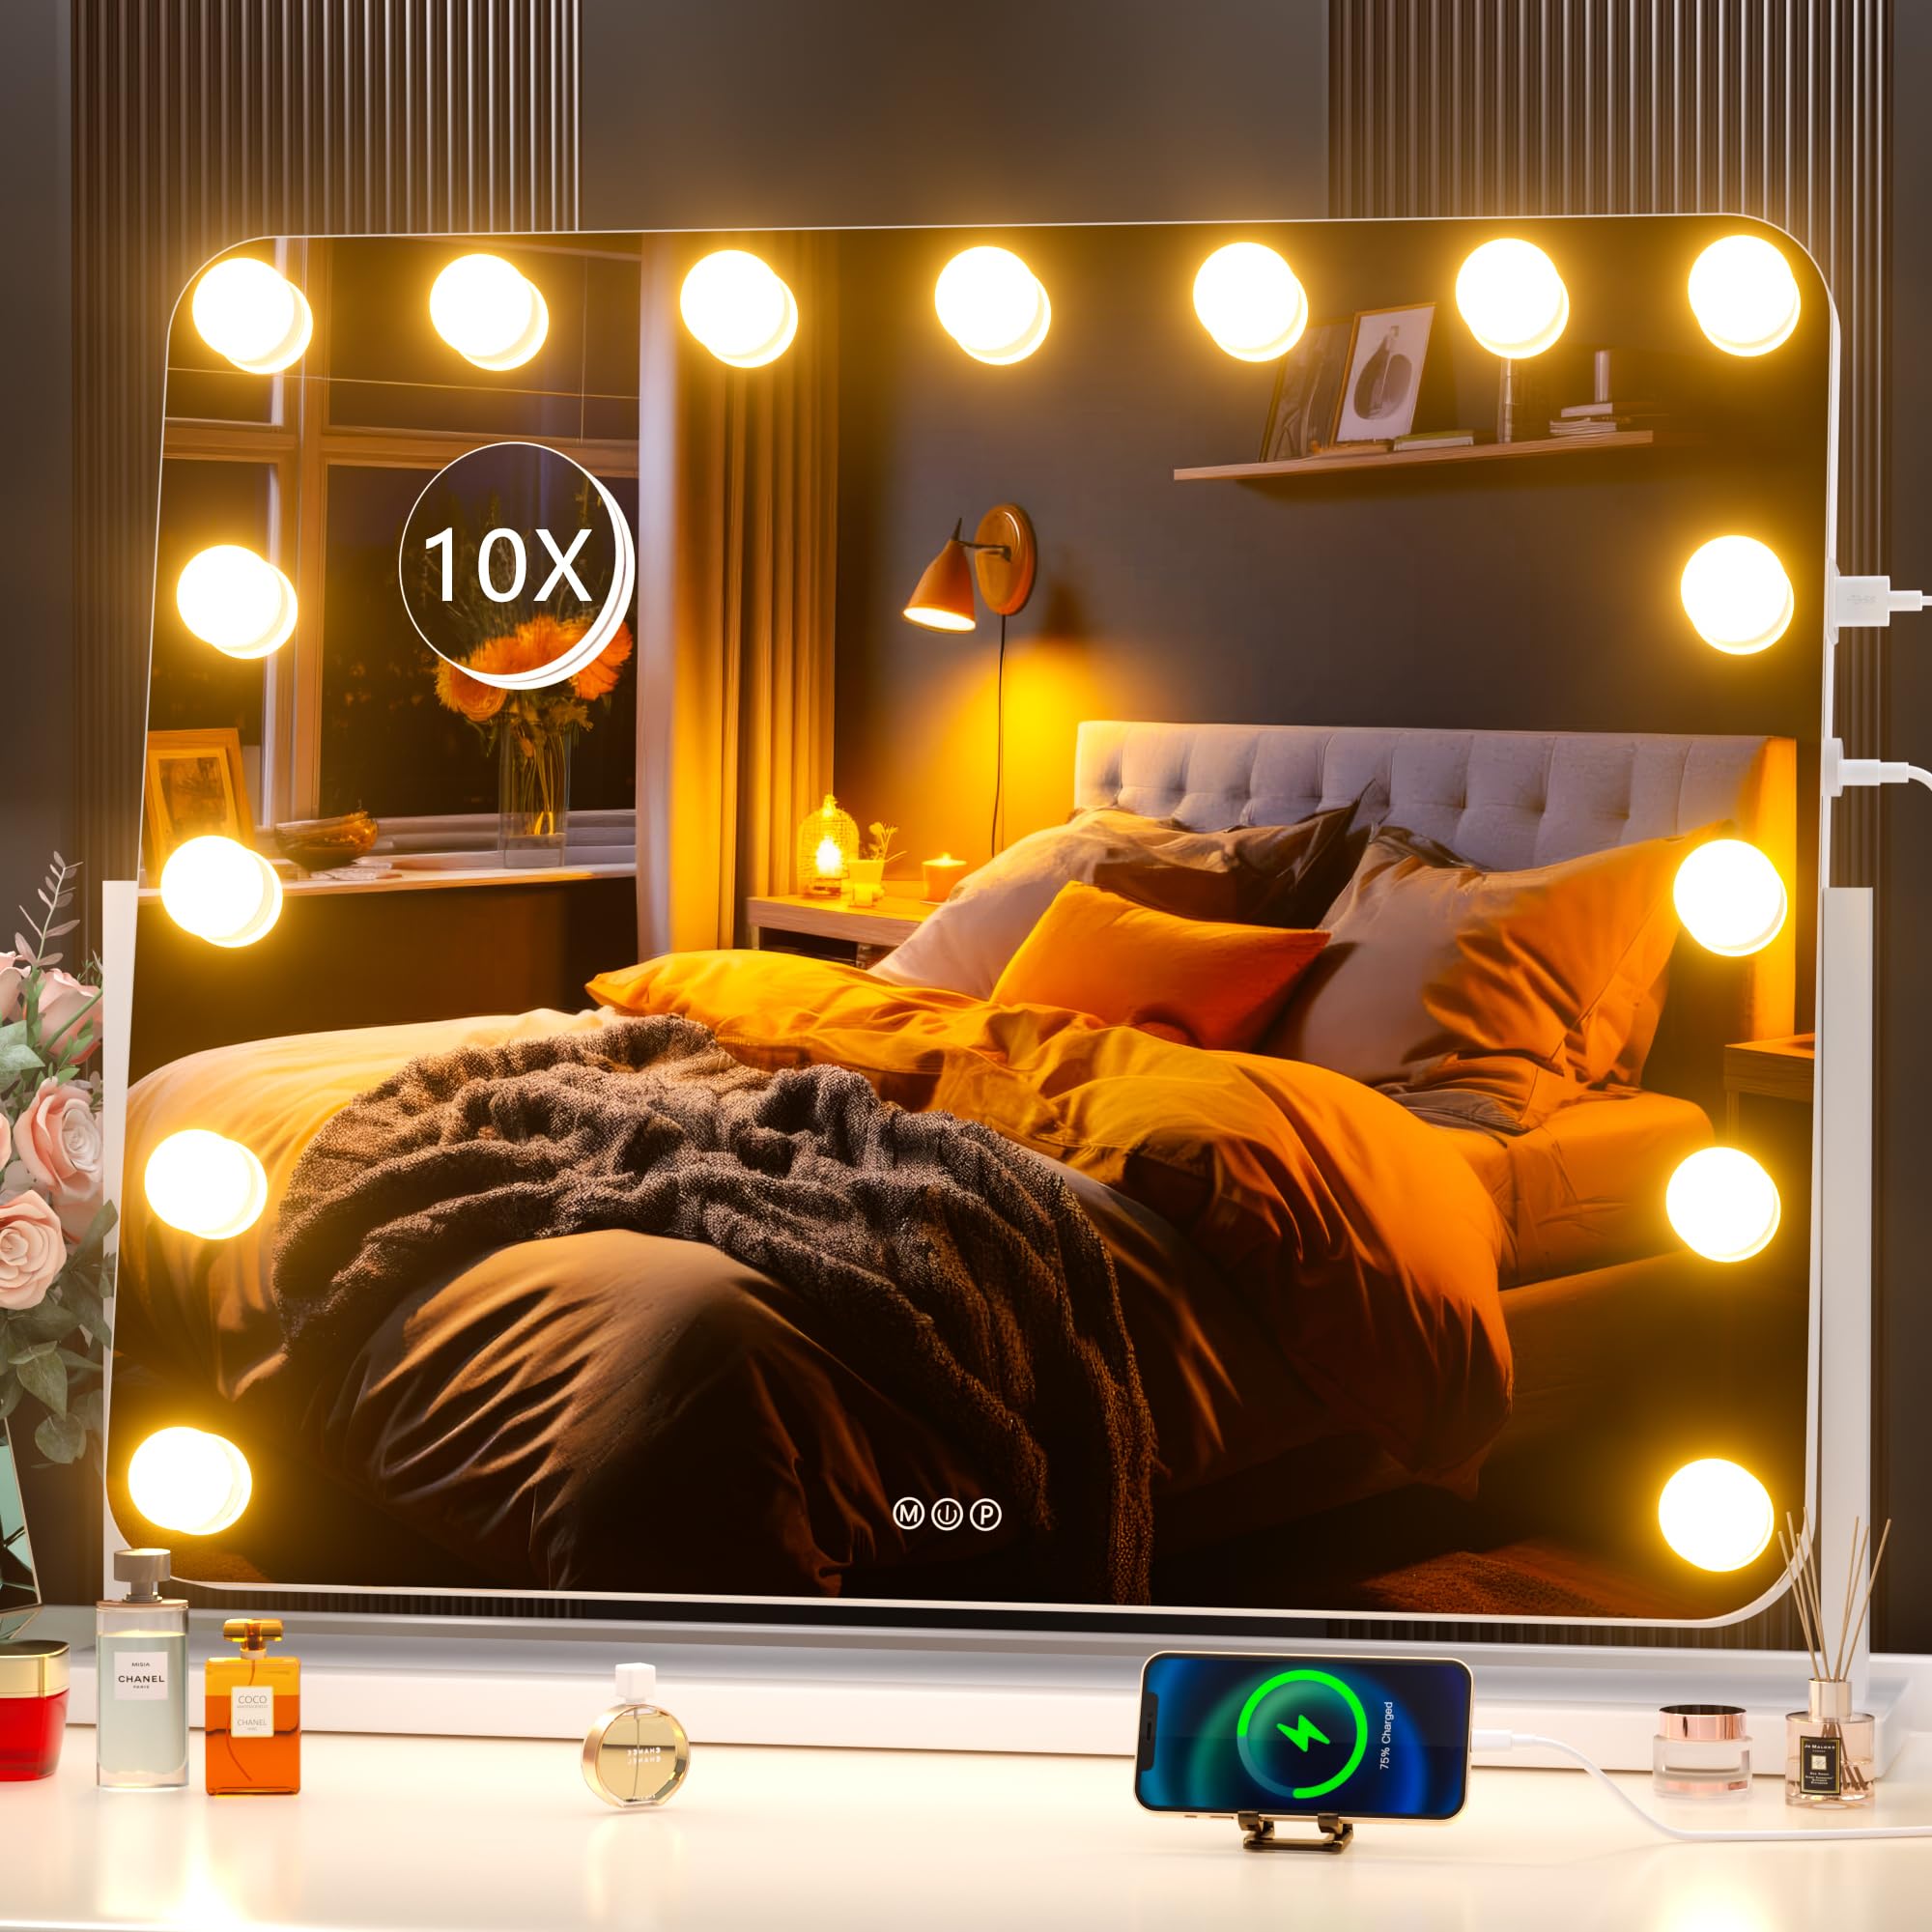 What are the advantages of Hasipu Hollywood Mirror？